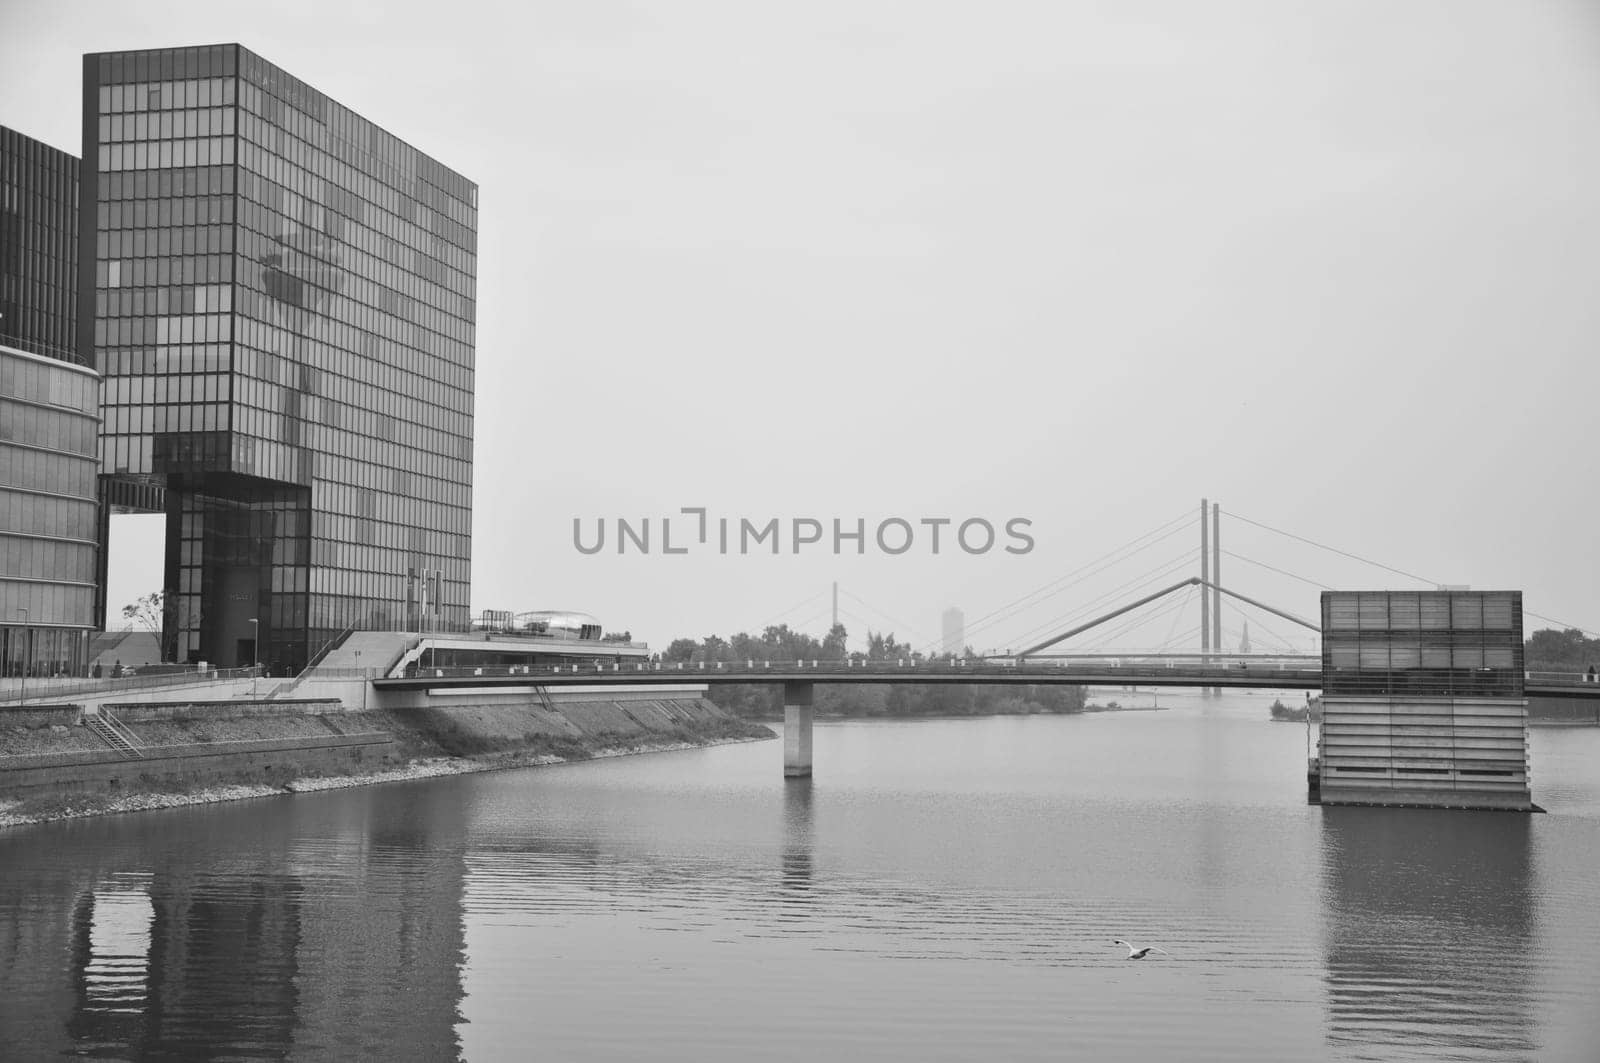 View into the harbor basin of the Media Harbor with Hyatt Hotel in Dusseldorf, Germany by rherrmannde